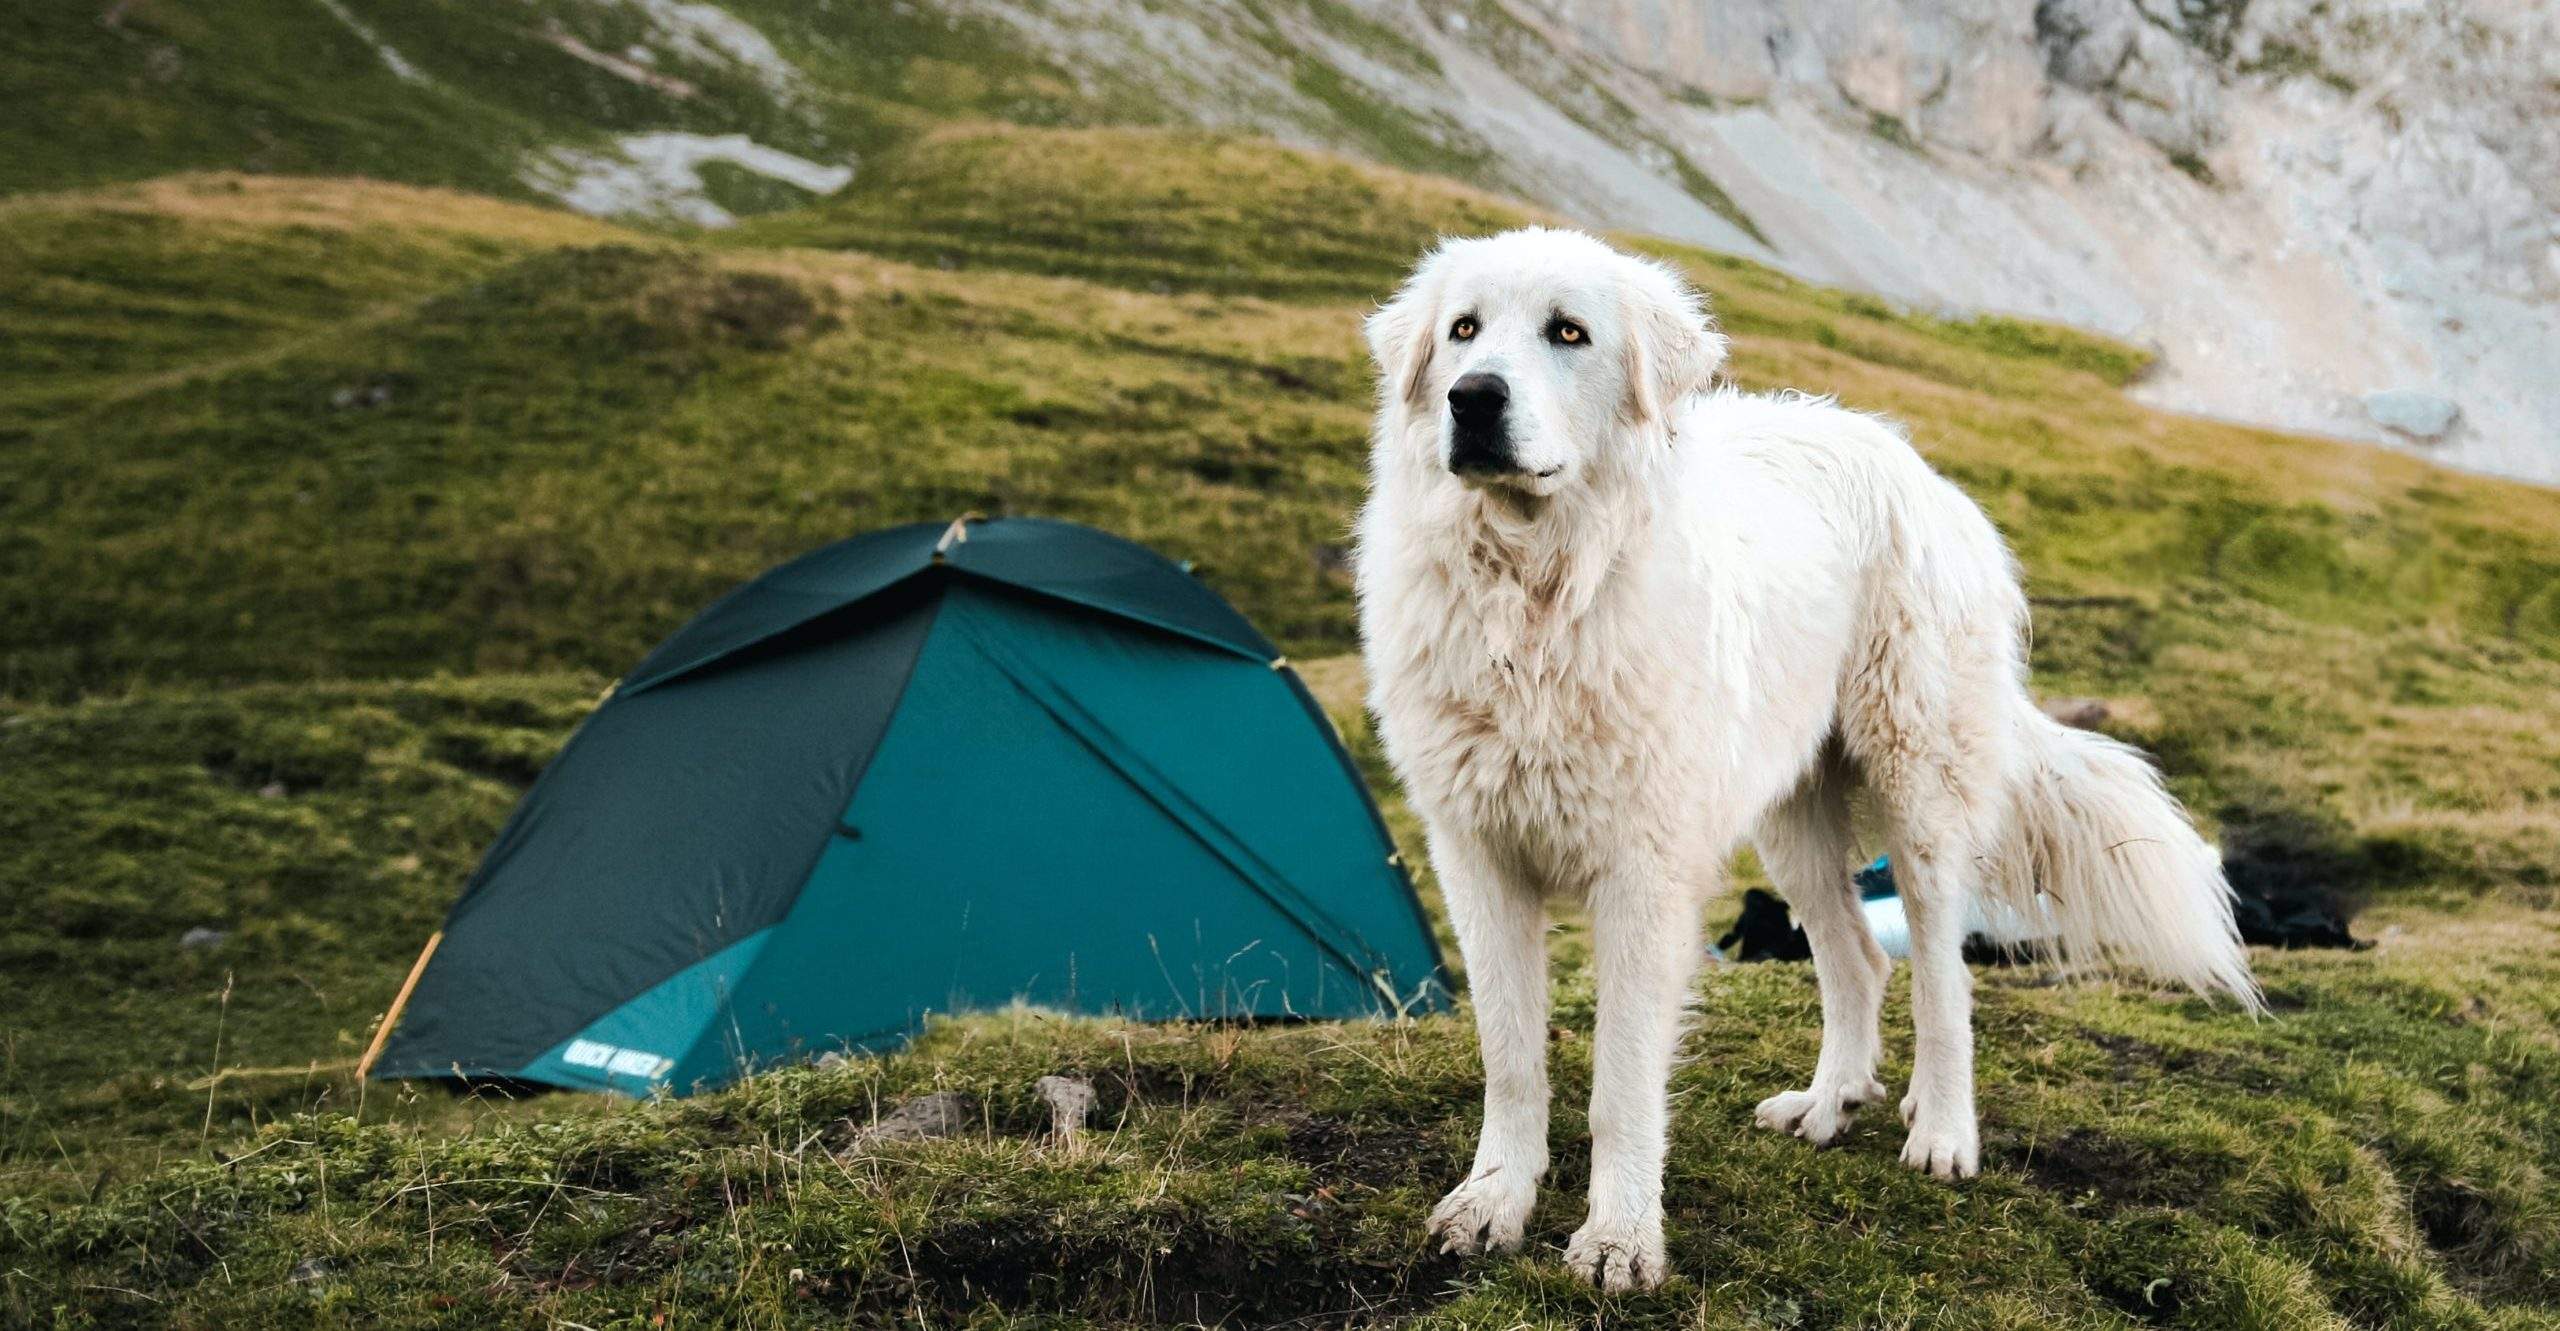 Finding pet-friendly campgrounds